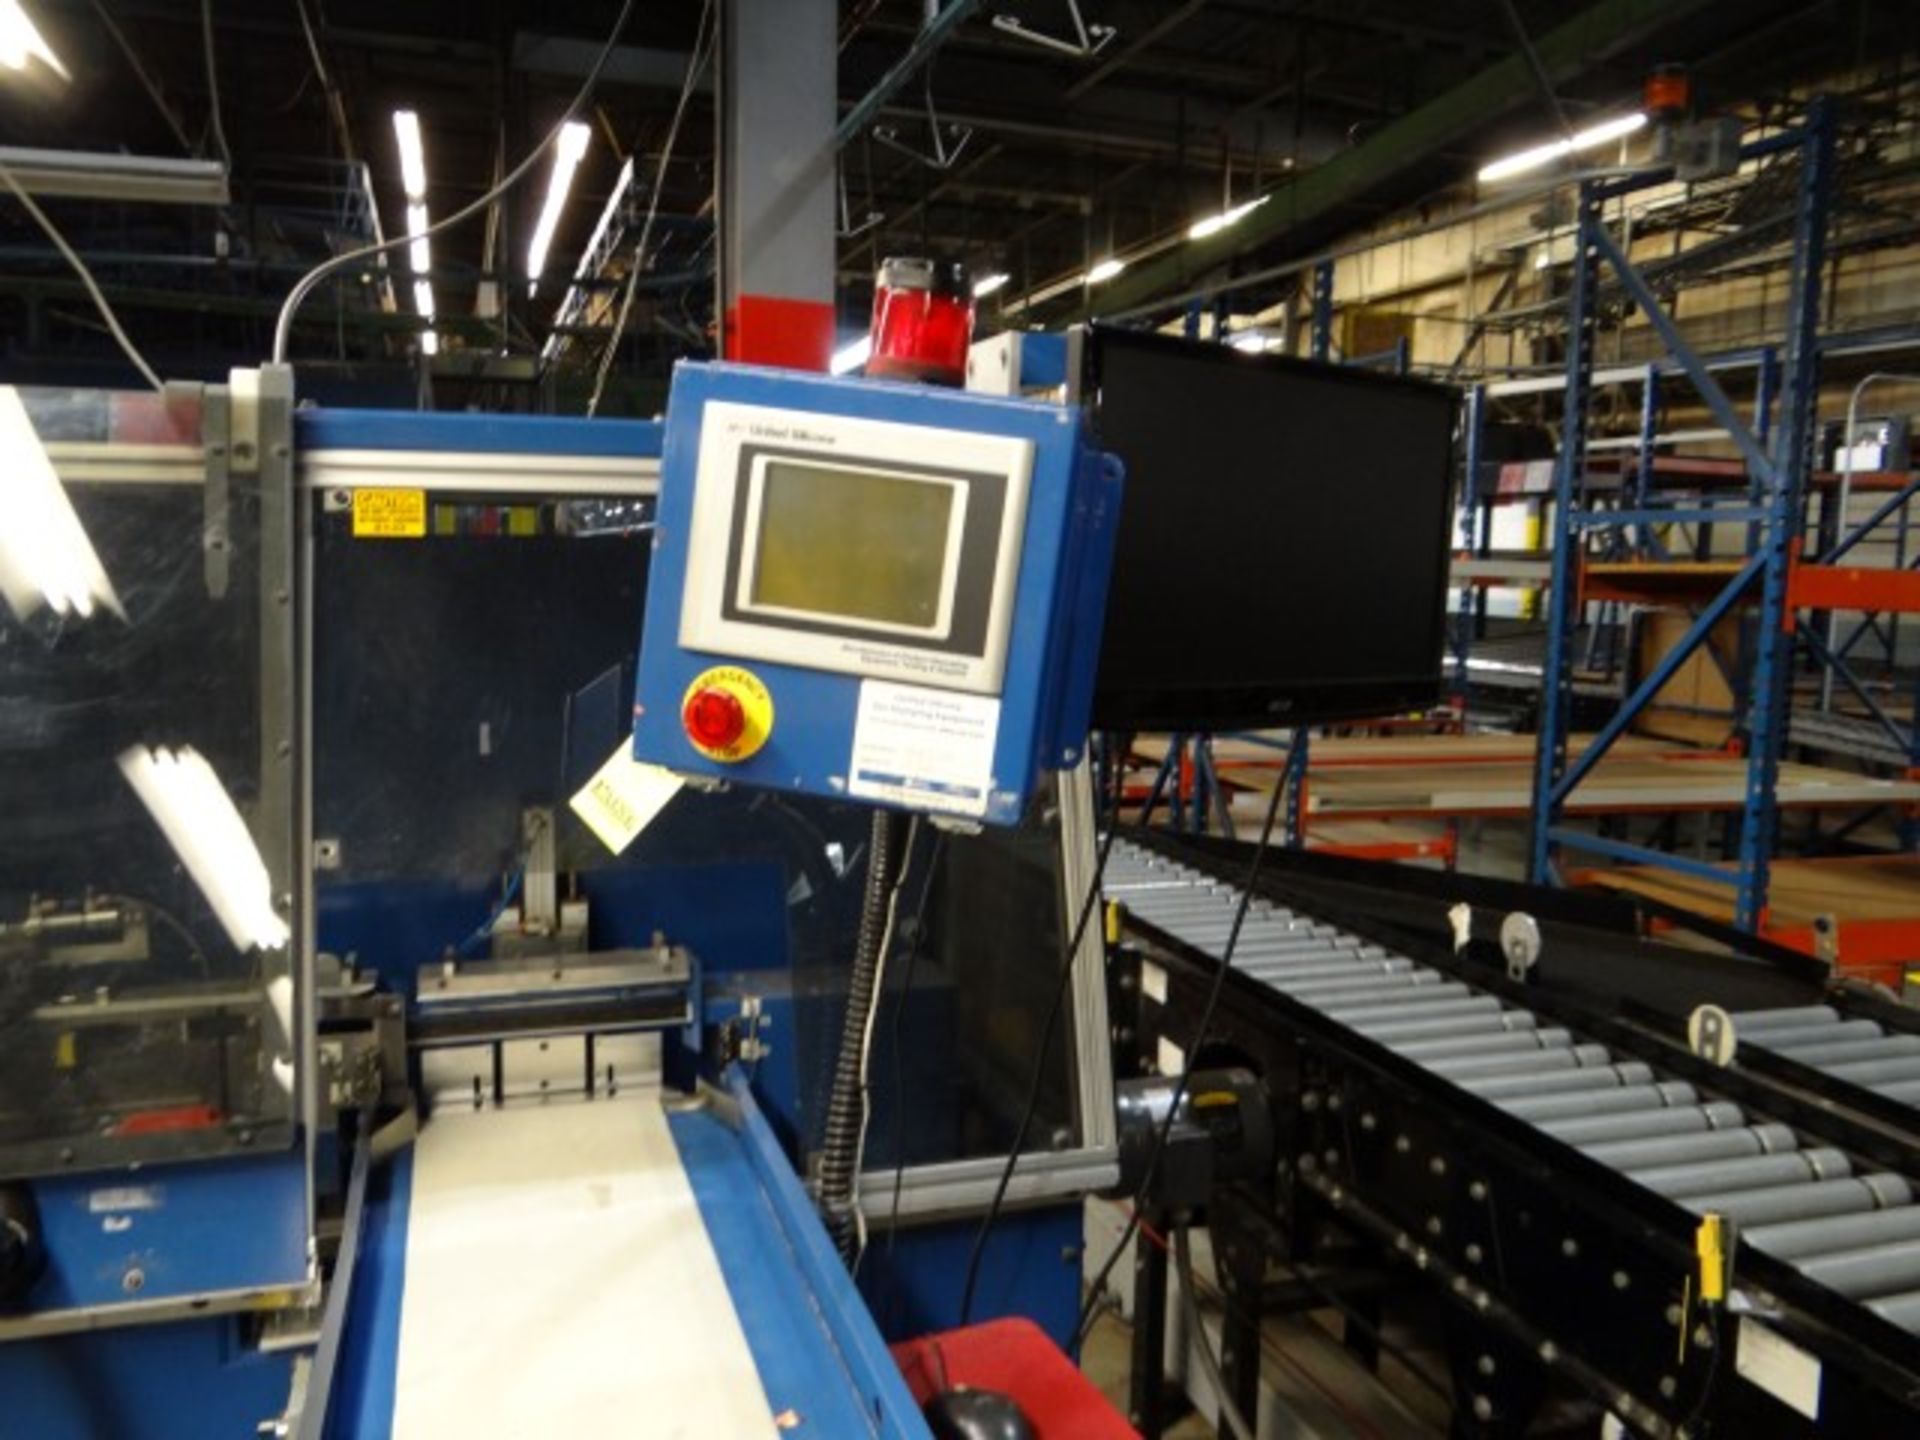 Tech King Cigarette Pick to Light System with 6 Pick Stations, Conveyors, Flow Racks, Box Tram and - Image 9 of 57